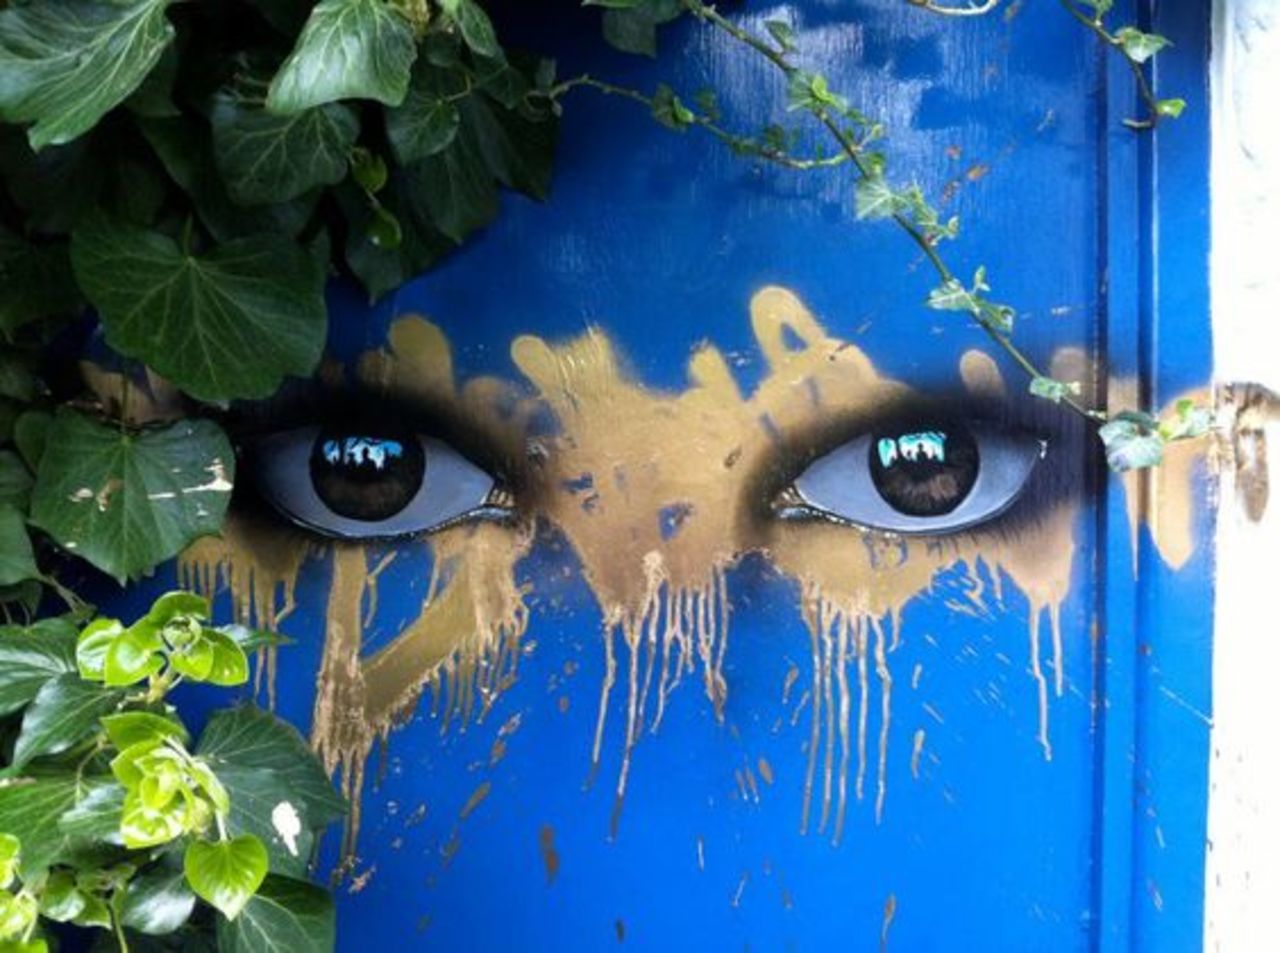 Discover  My Dog Sighs Artworks here's my interview with MyDogSighs https://streetart360.net/2017/08/30/interview-with-my-dog-sighs/#streetart #art #graffiti https://t.co/DKdNuzUBWX